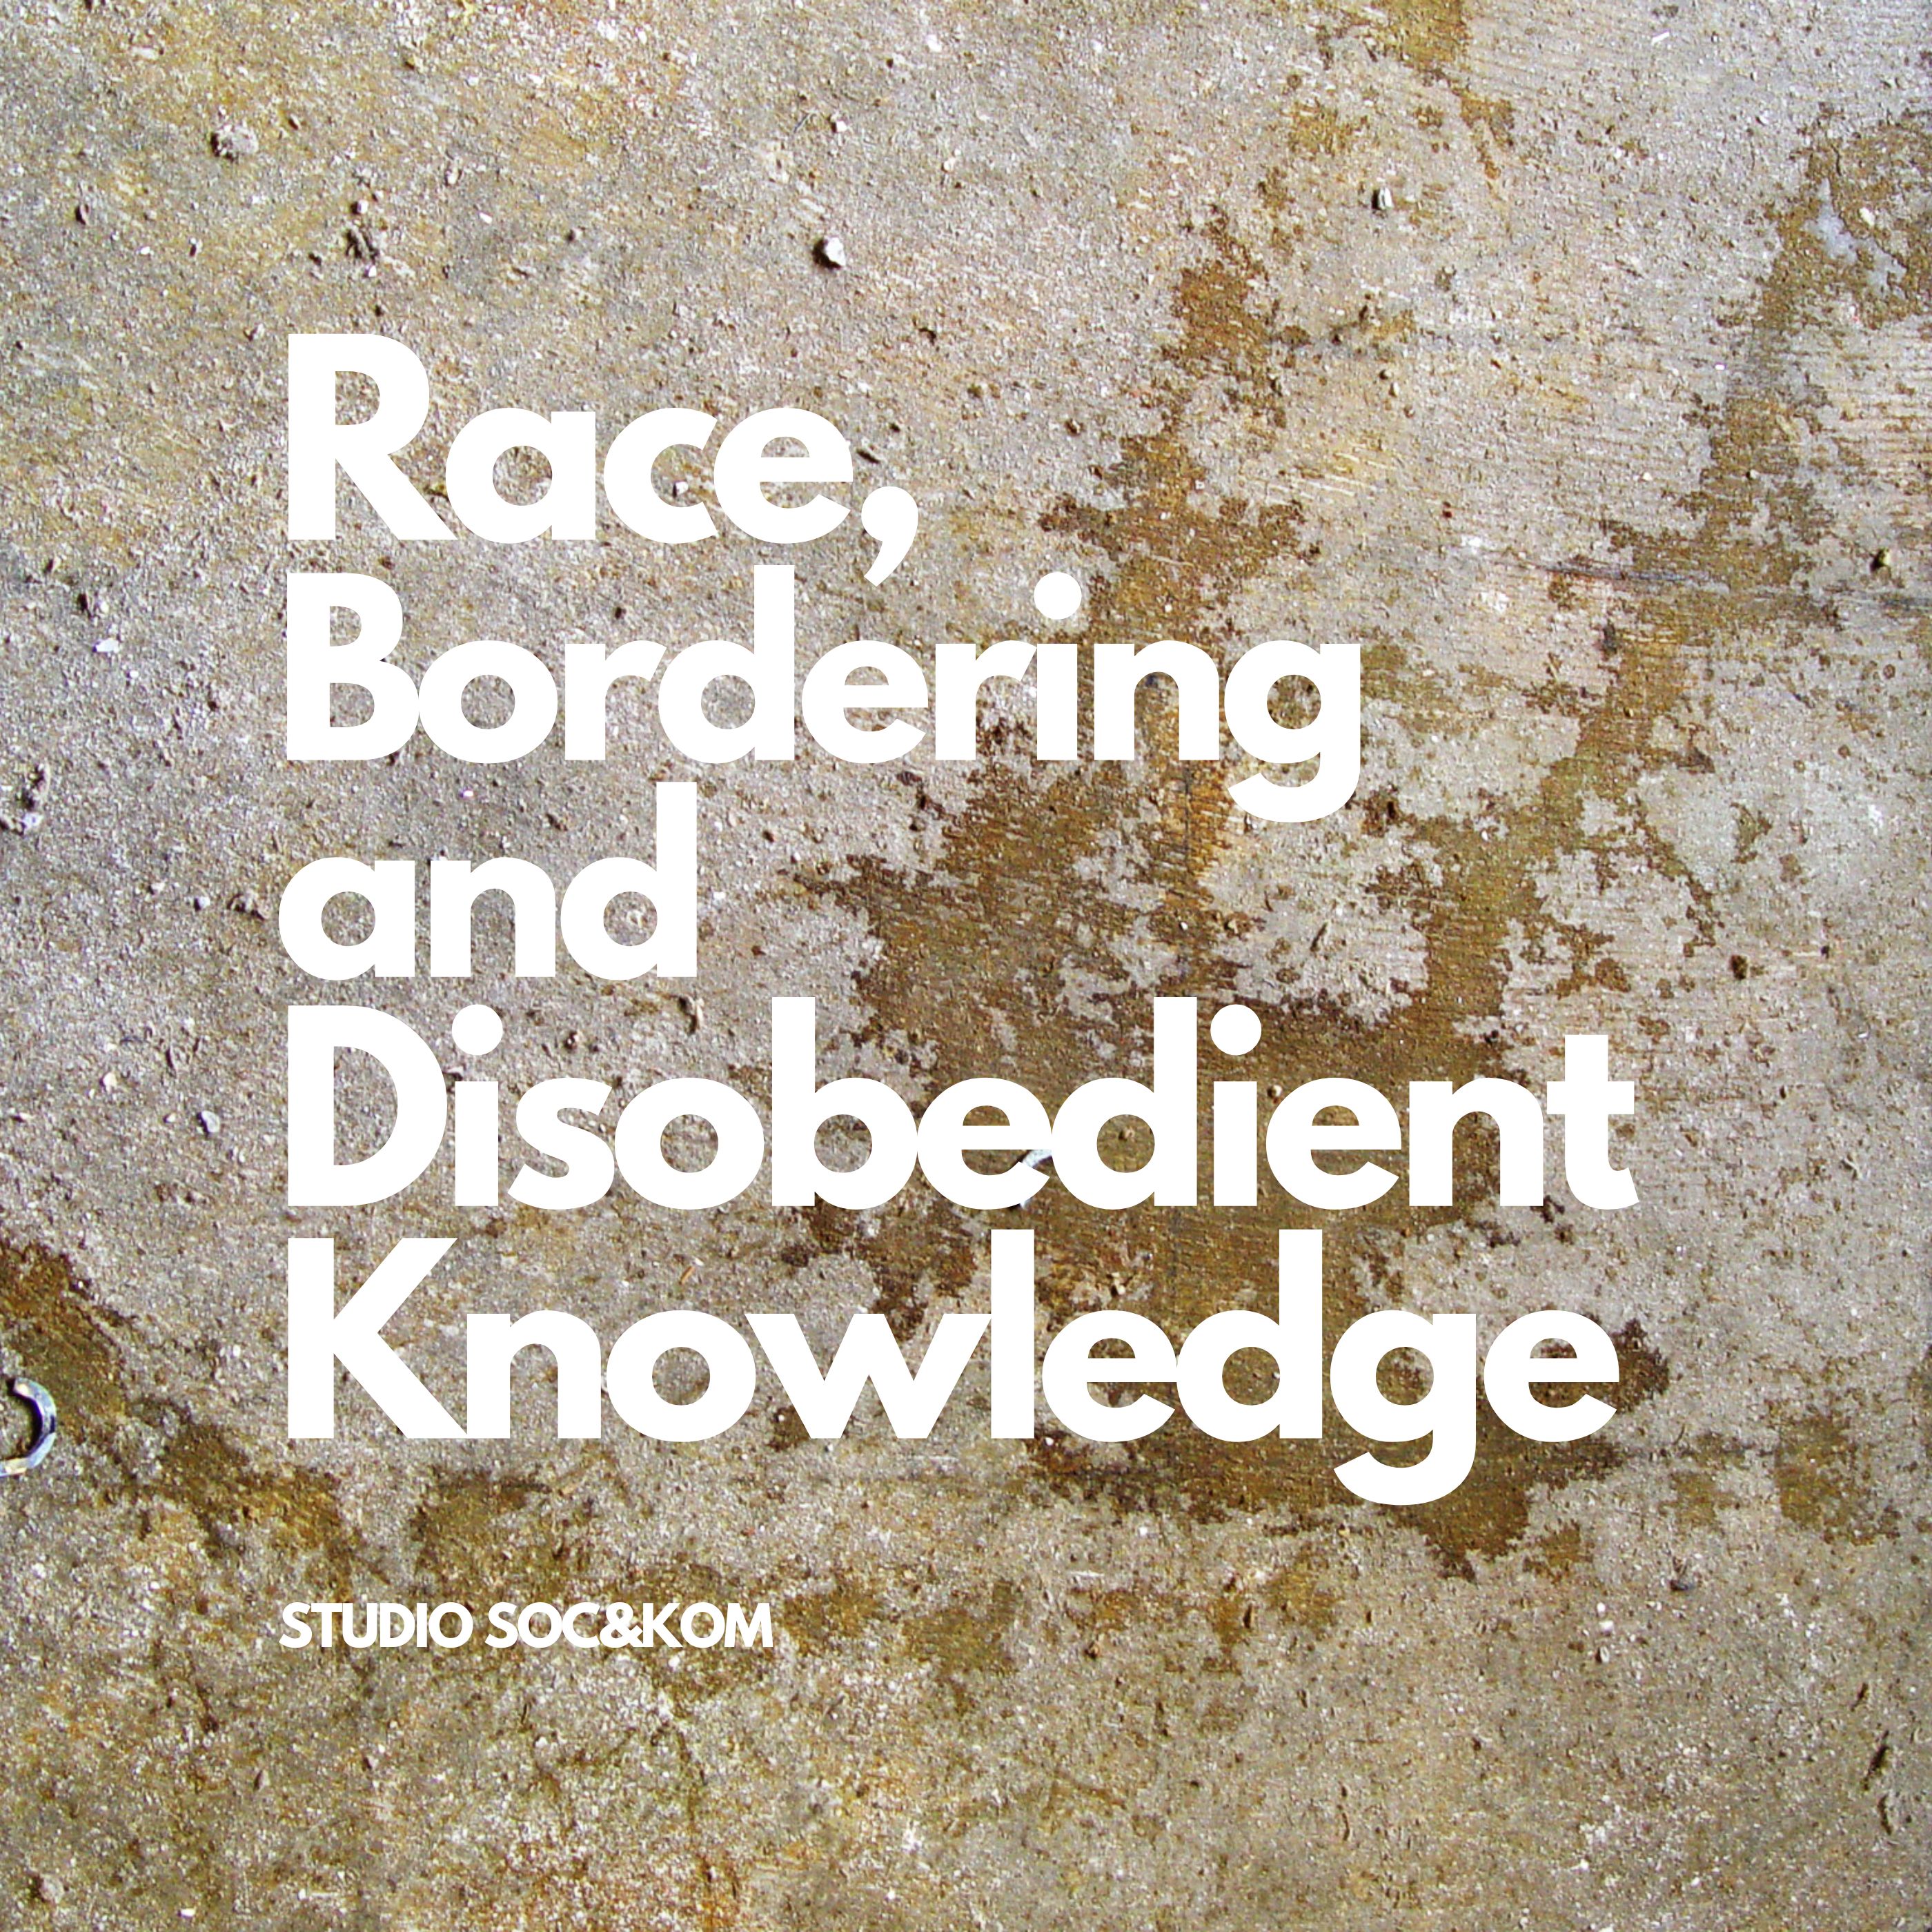 #1: About race, bordering and disobedient knowledge